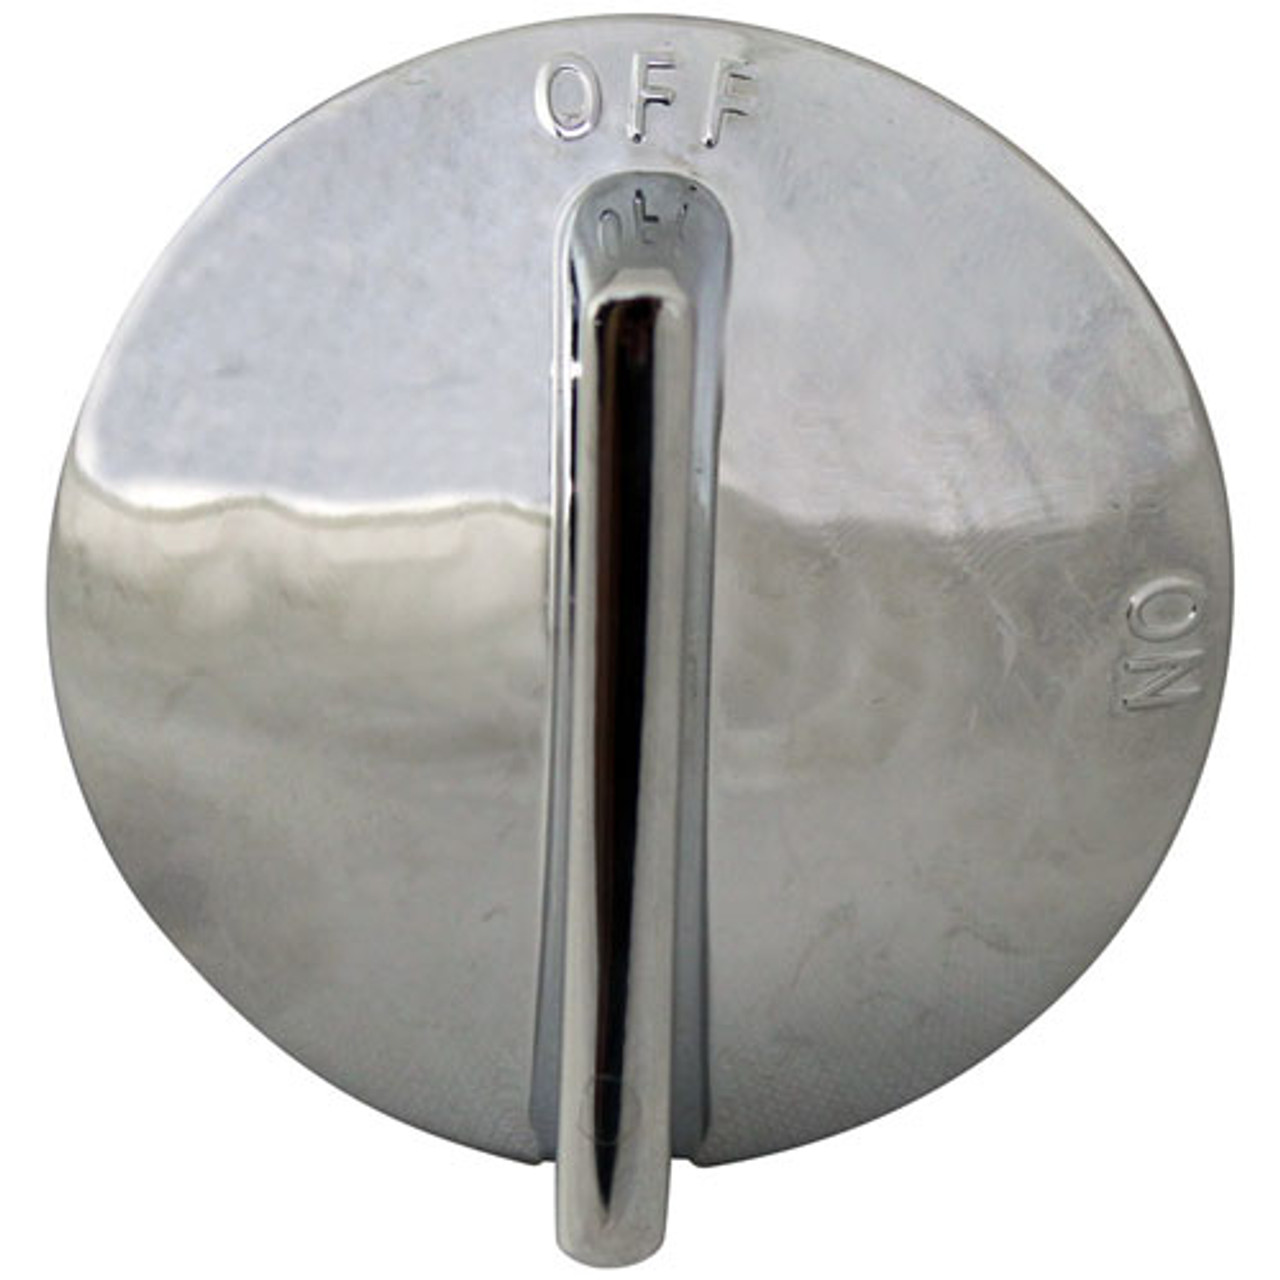 Knob 2 D, Off-On - Replacement Part For Garland 224002